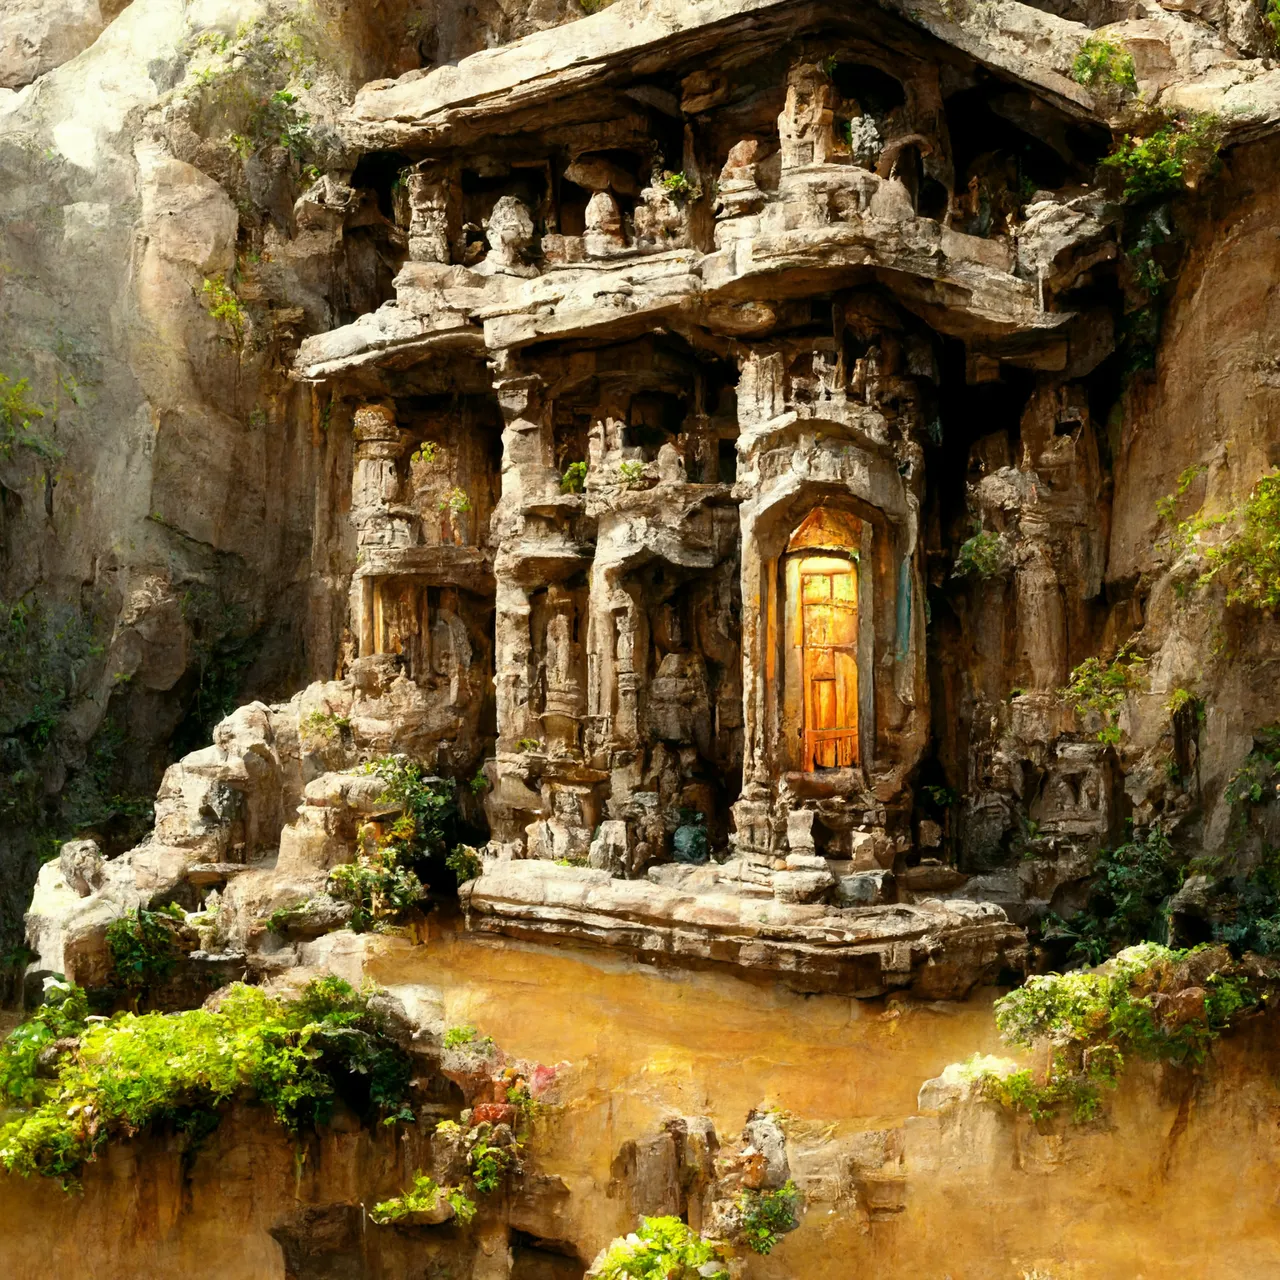 Ed_Privat_Ancient_temple_in_a_cliff_with_water_and_animals_drin_e7e73d7e-6508-4325-a350-344469259016 (1).png